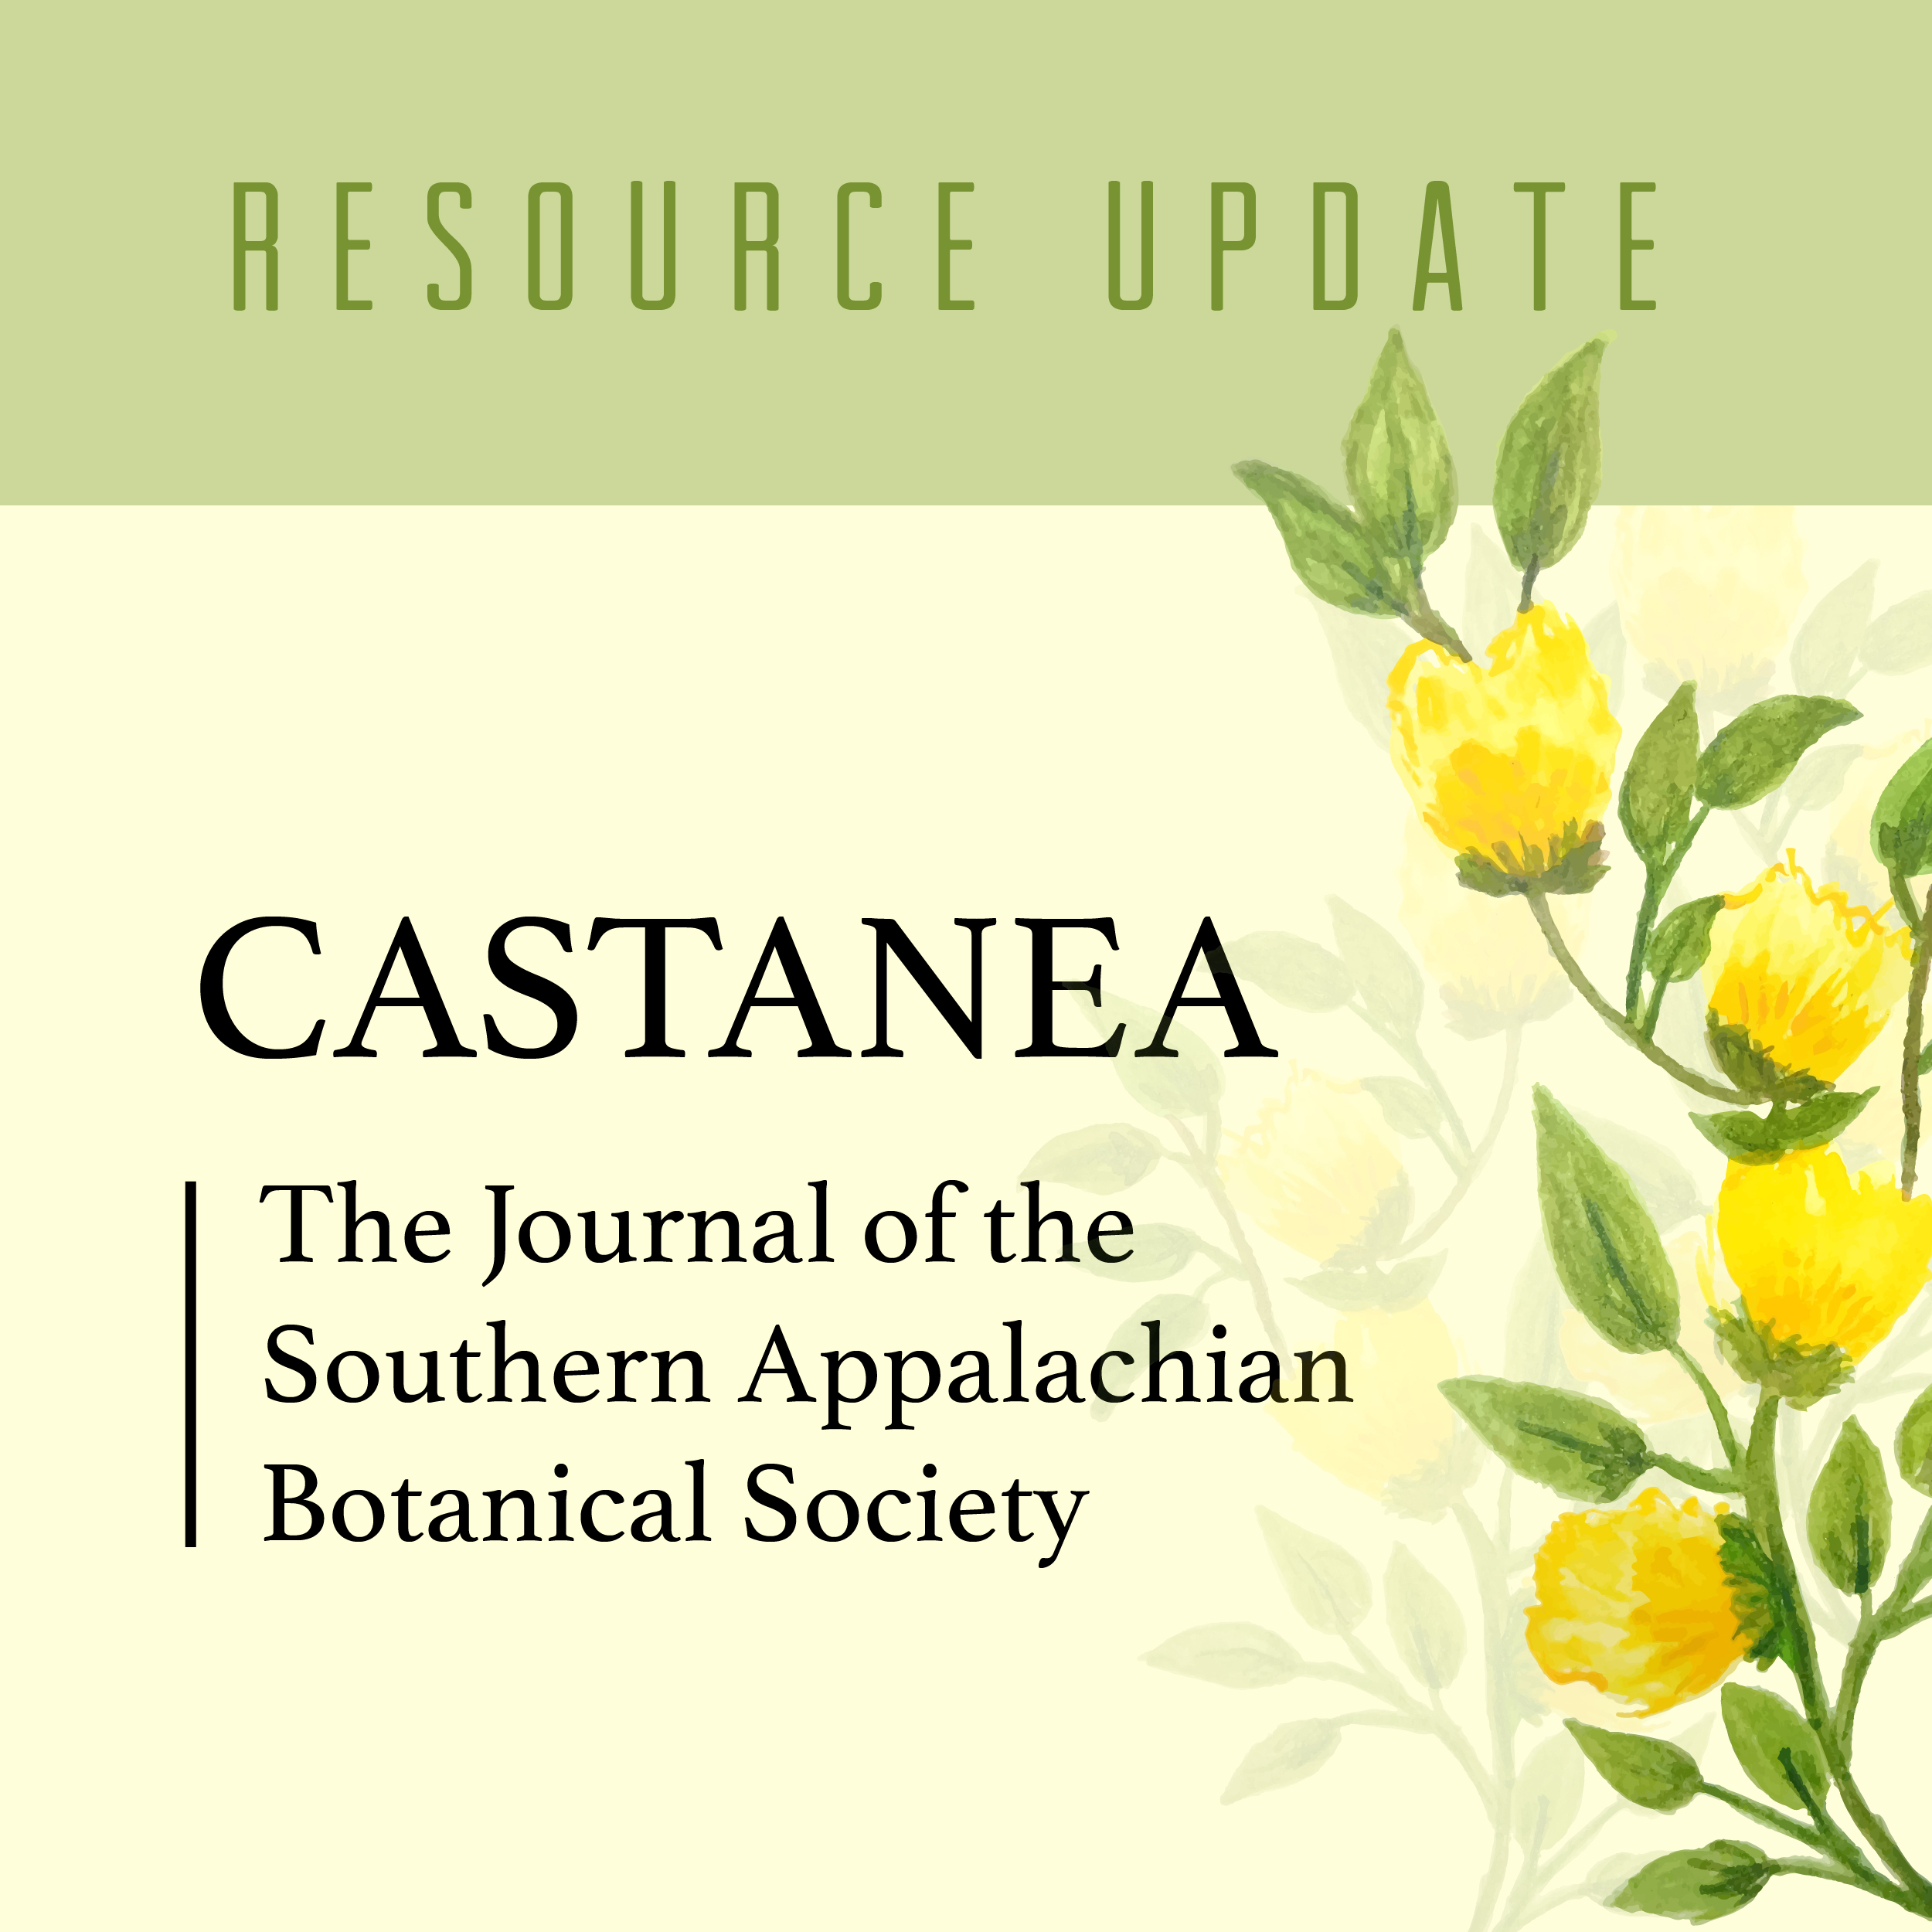 Resource update for Castanea the Journal of the Southern Appalachian Botanical Society